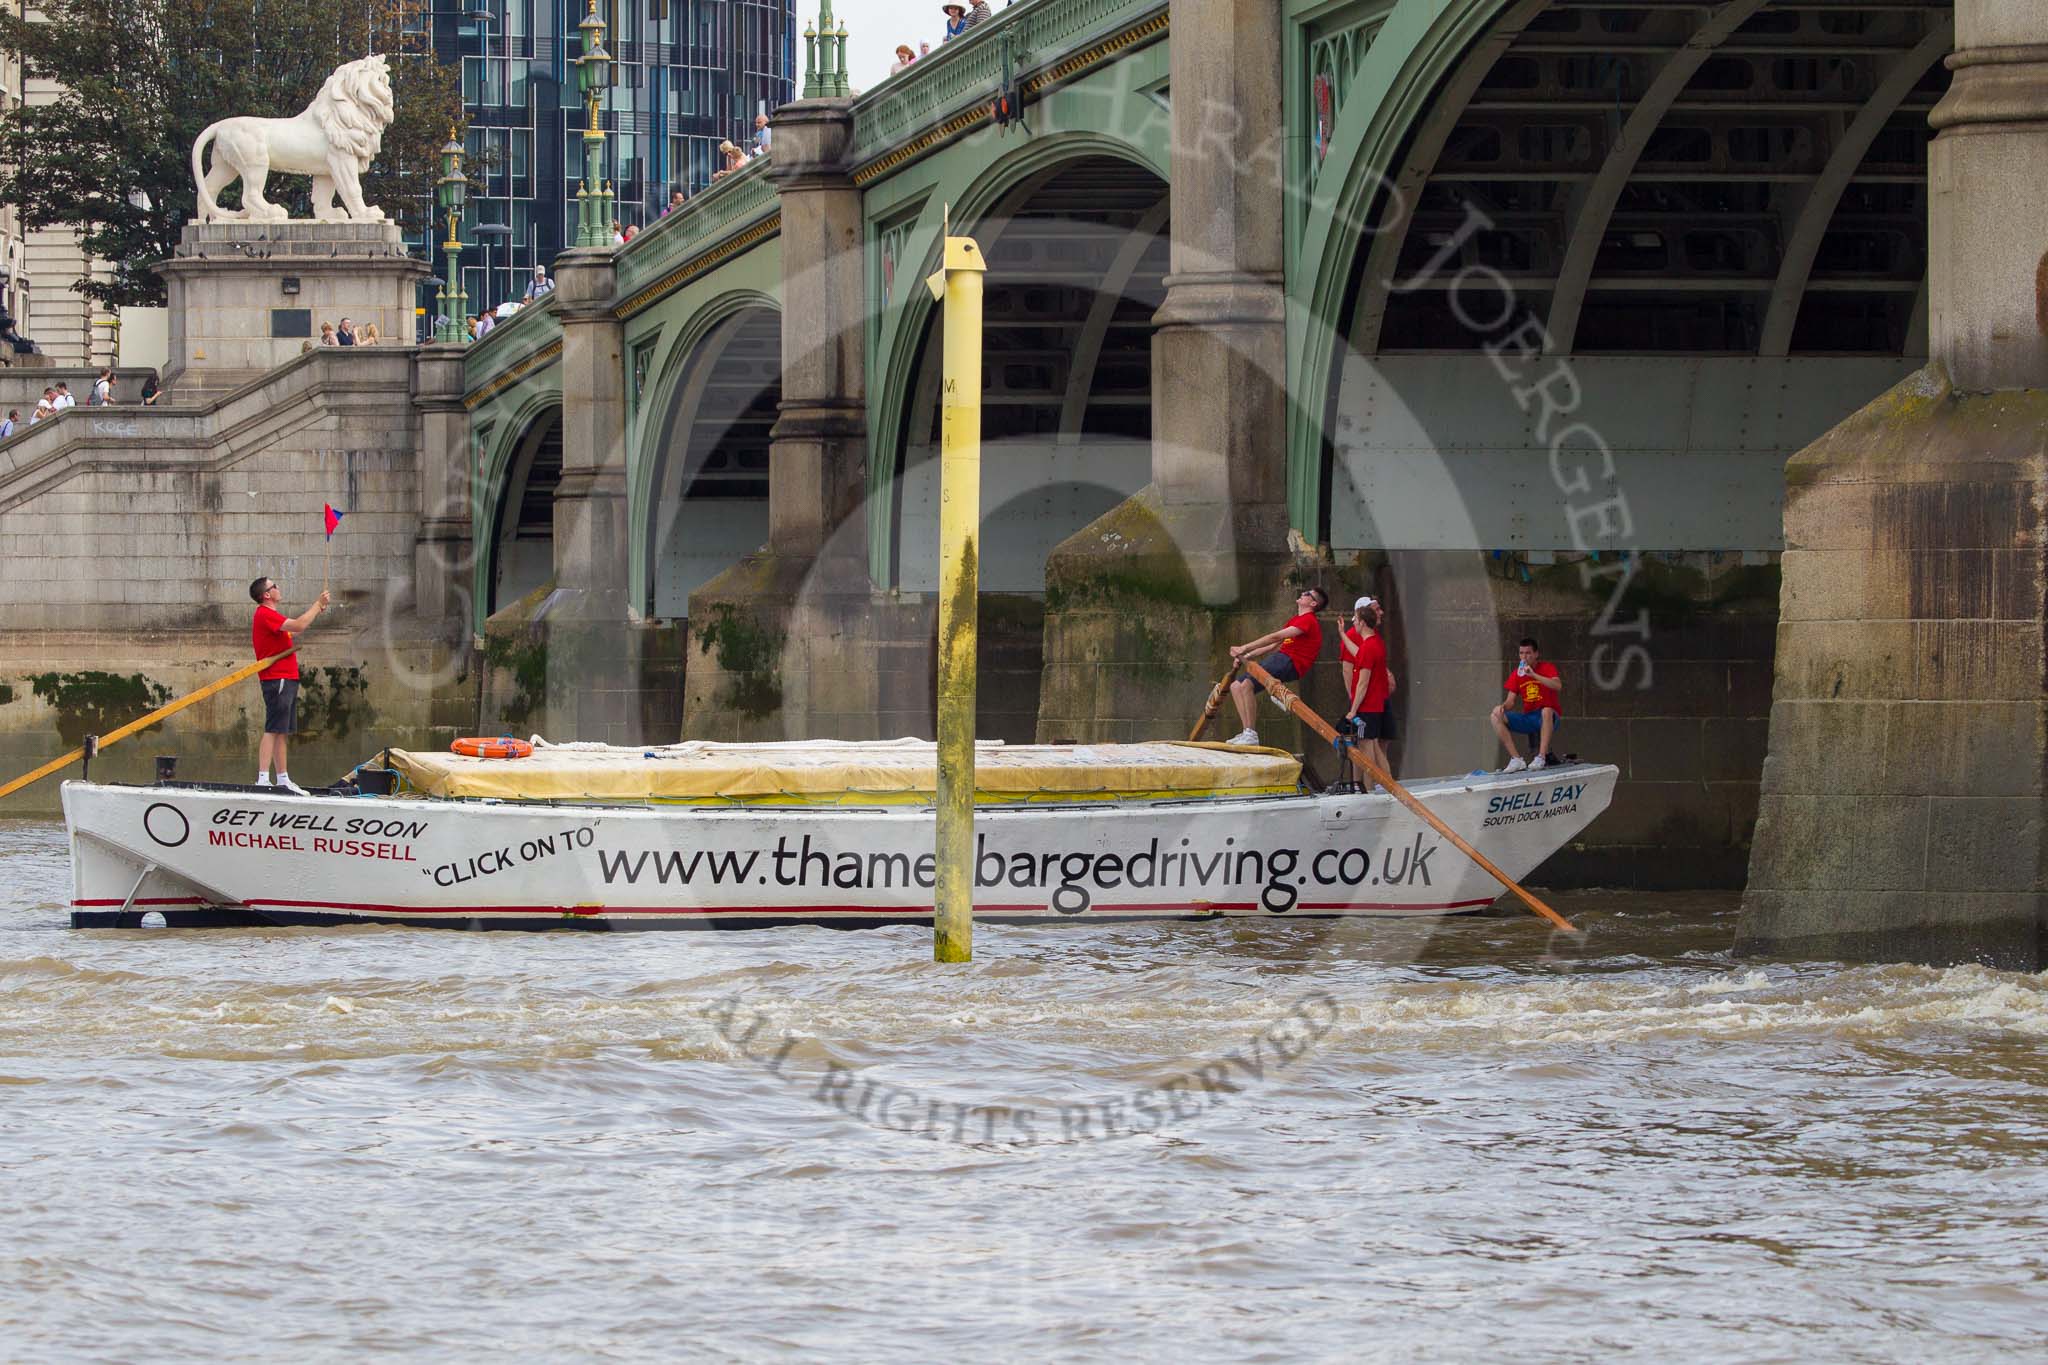 TOW River Thames Barge Driving Race 2013: Barge ""Shell Bay" by South Dock Marina,  crosses the finish of the race at Westminster Bridge..
River Thames between Greenwich and Westminster,
London,

United Kingdom,
on 13 July 2013 at 14:24, image #450